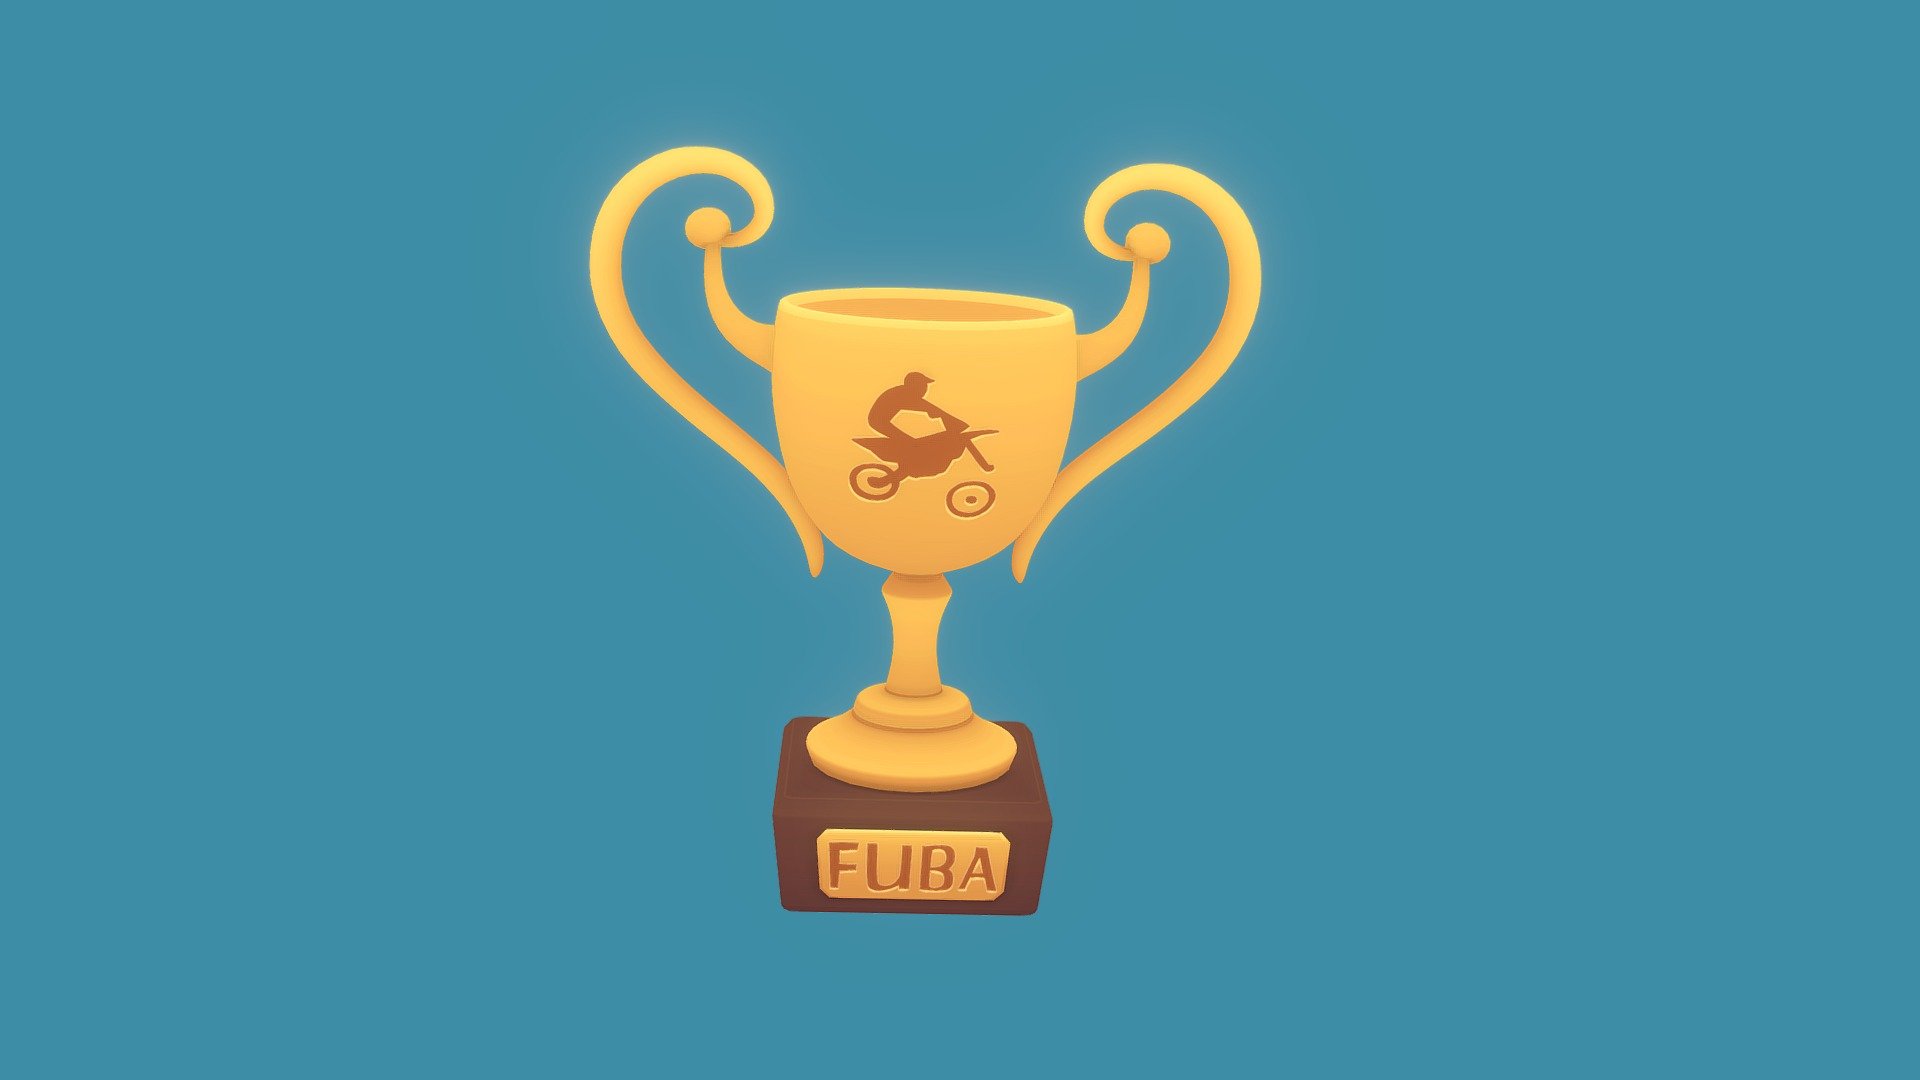 The FUBA trophy from the Hat Films Trials videos!

The original trohpy reference:

 - FUBA Trophy - 3D model by Lollitree 3d model